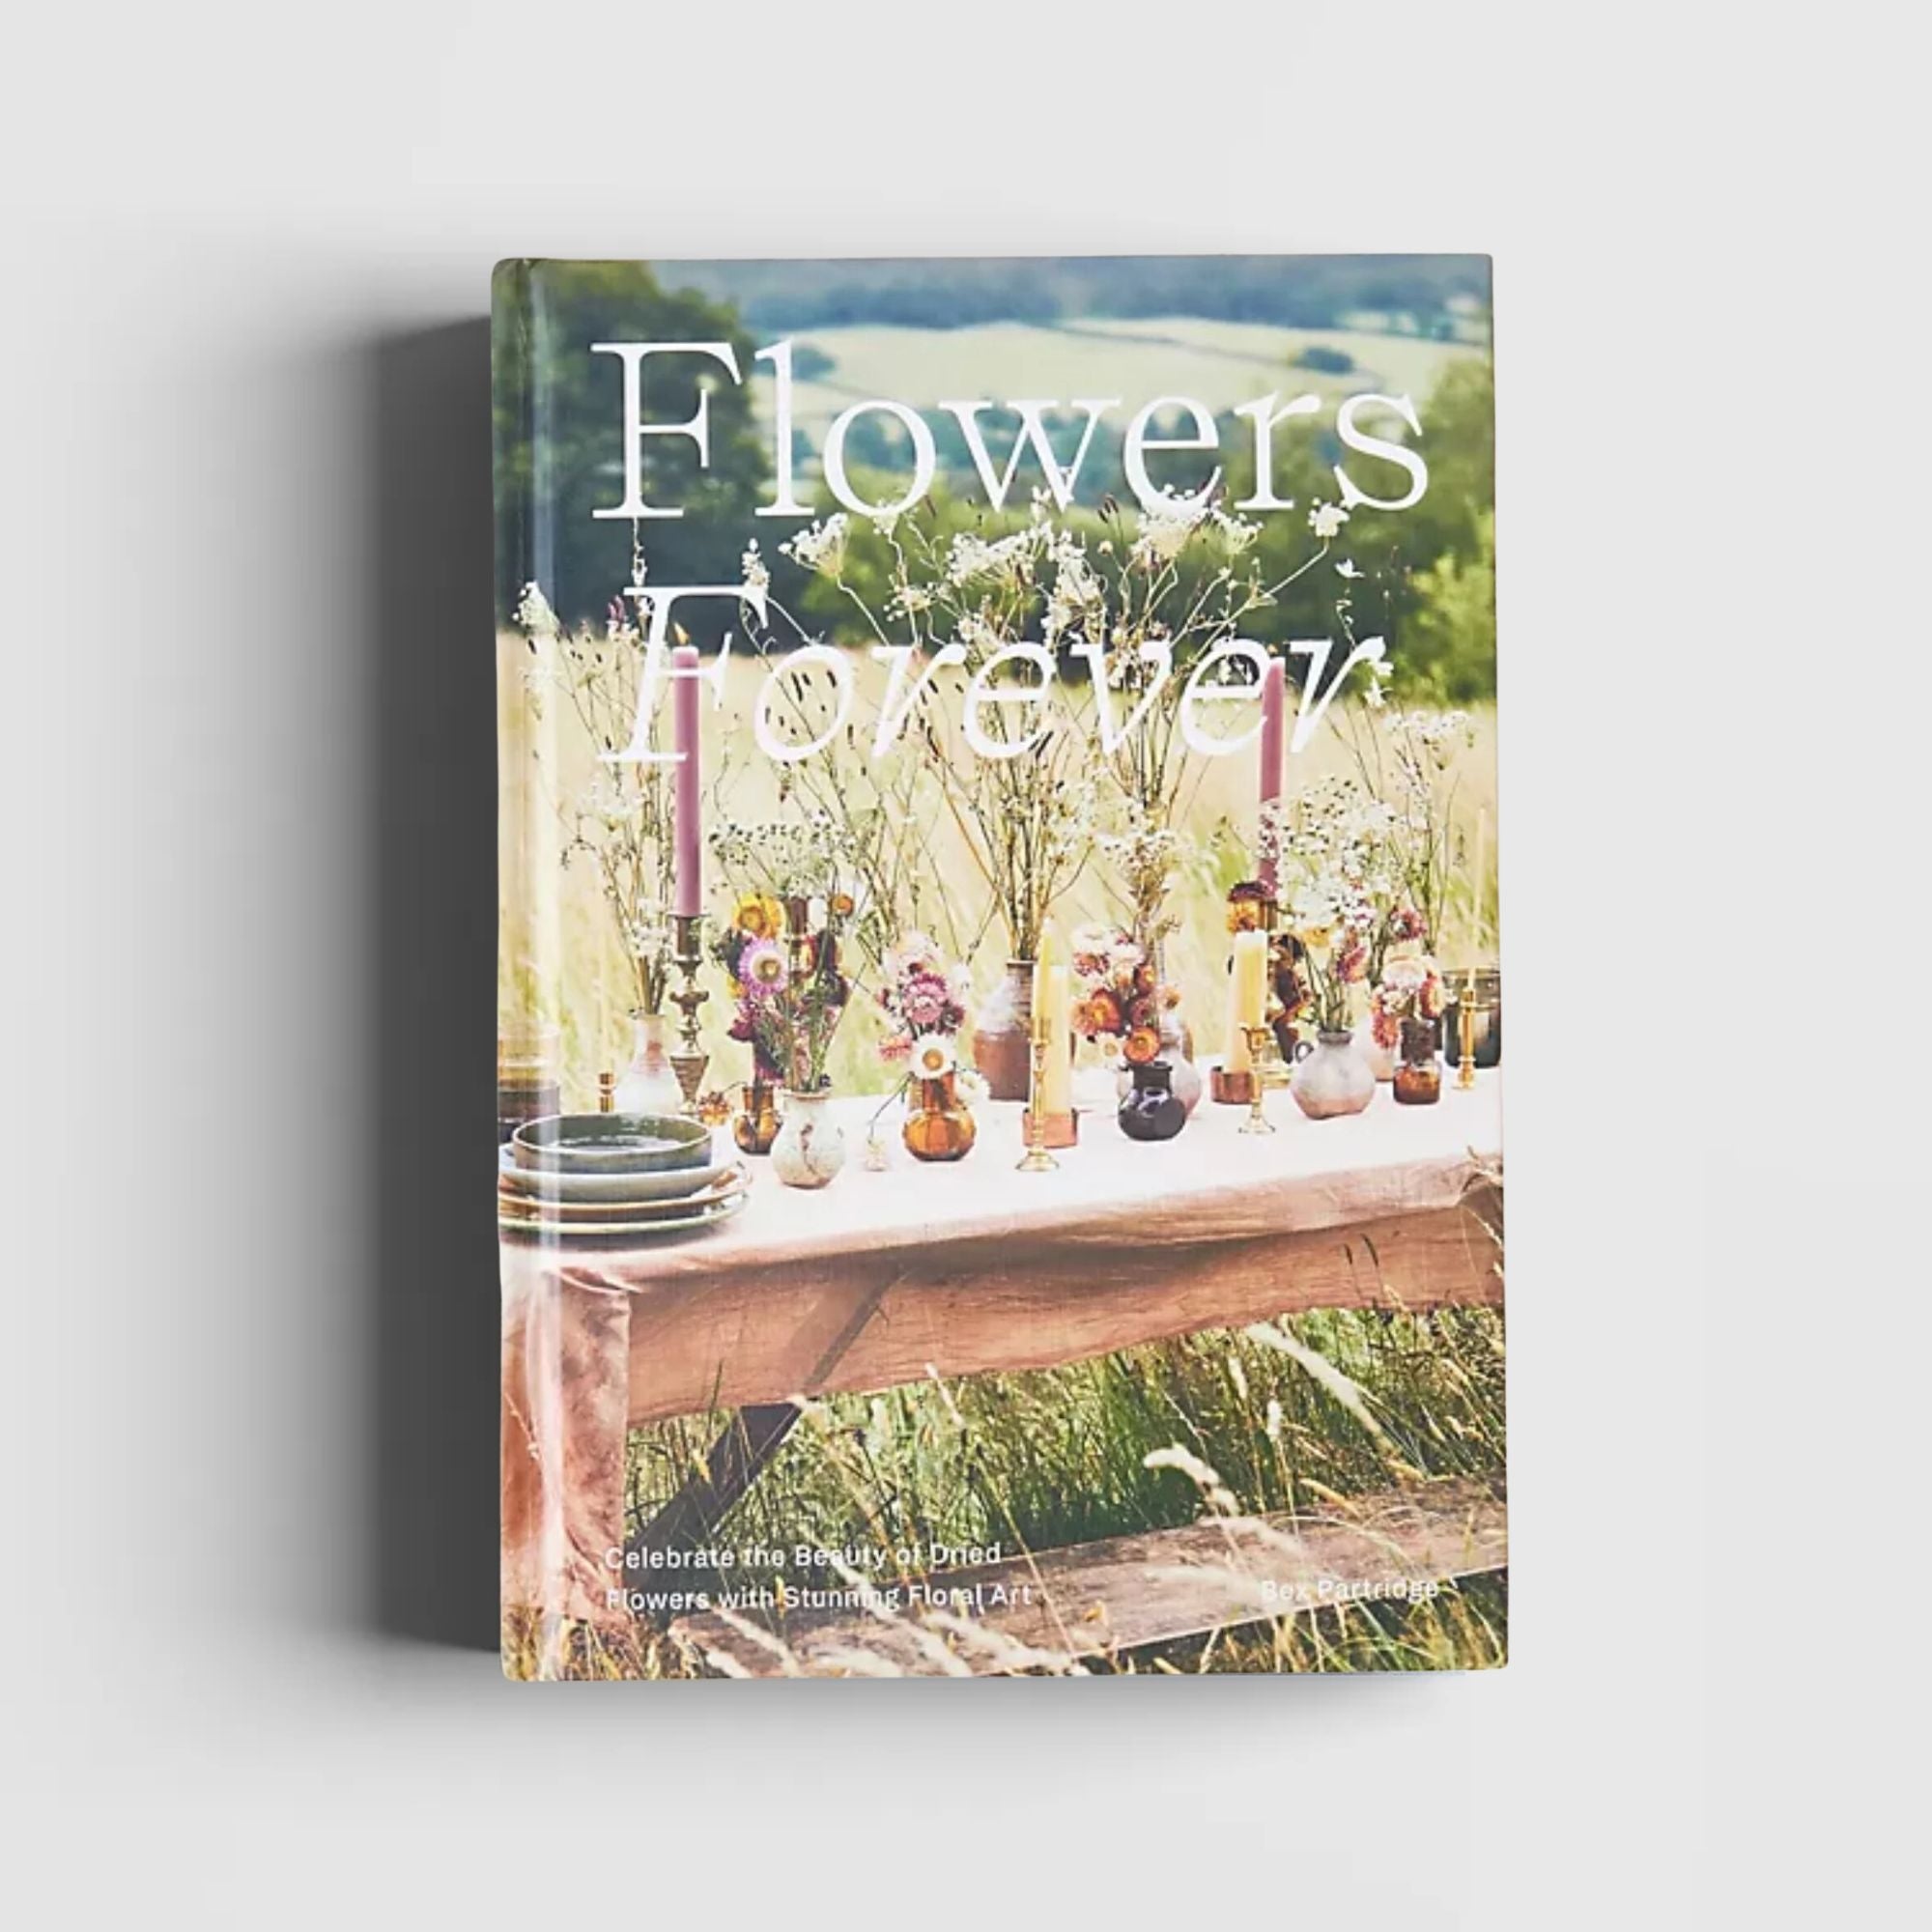 Flowers Forever Book